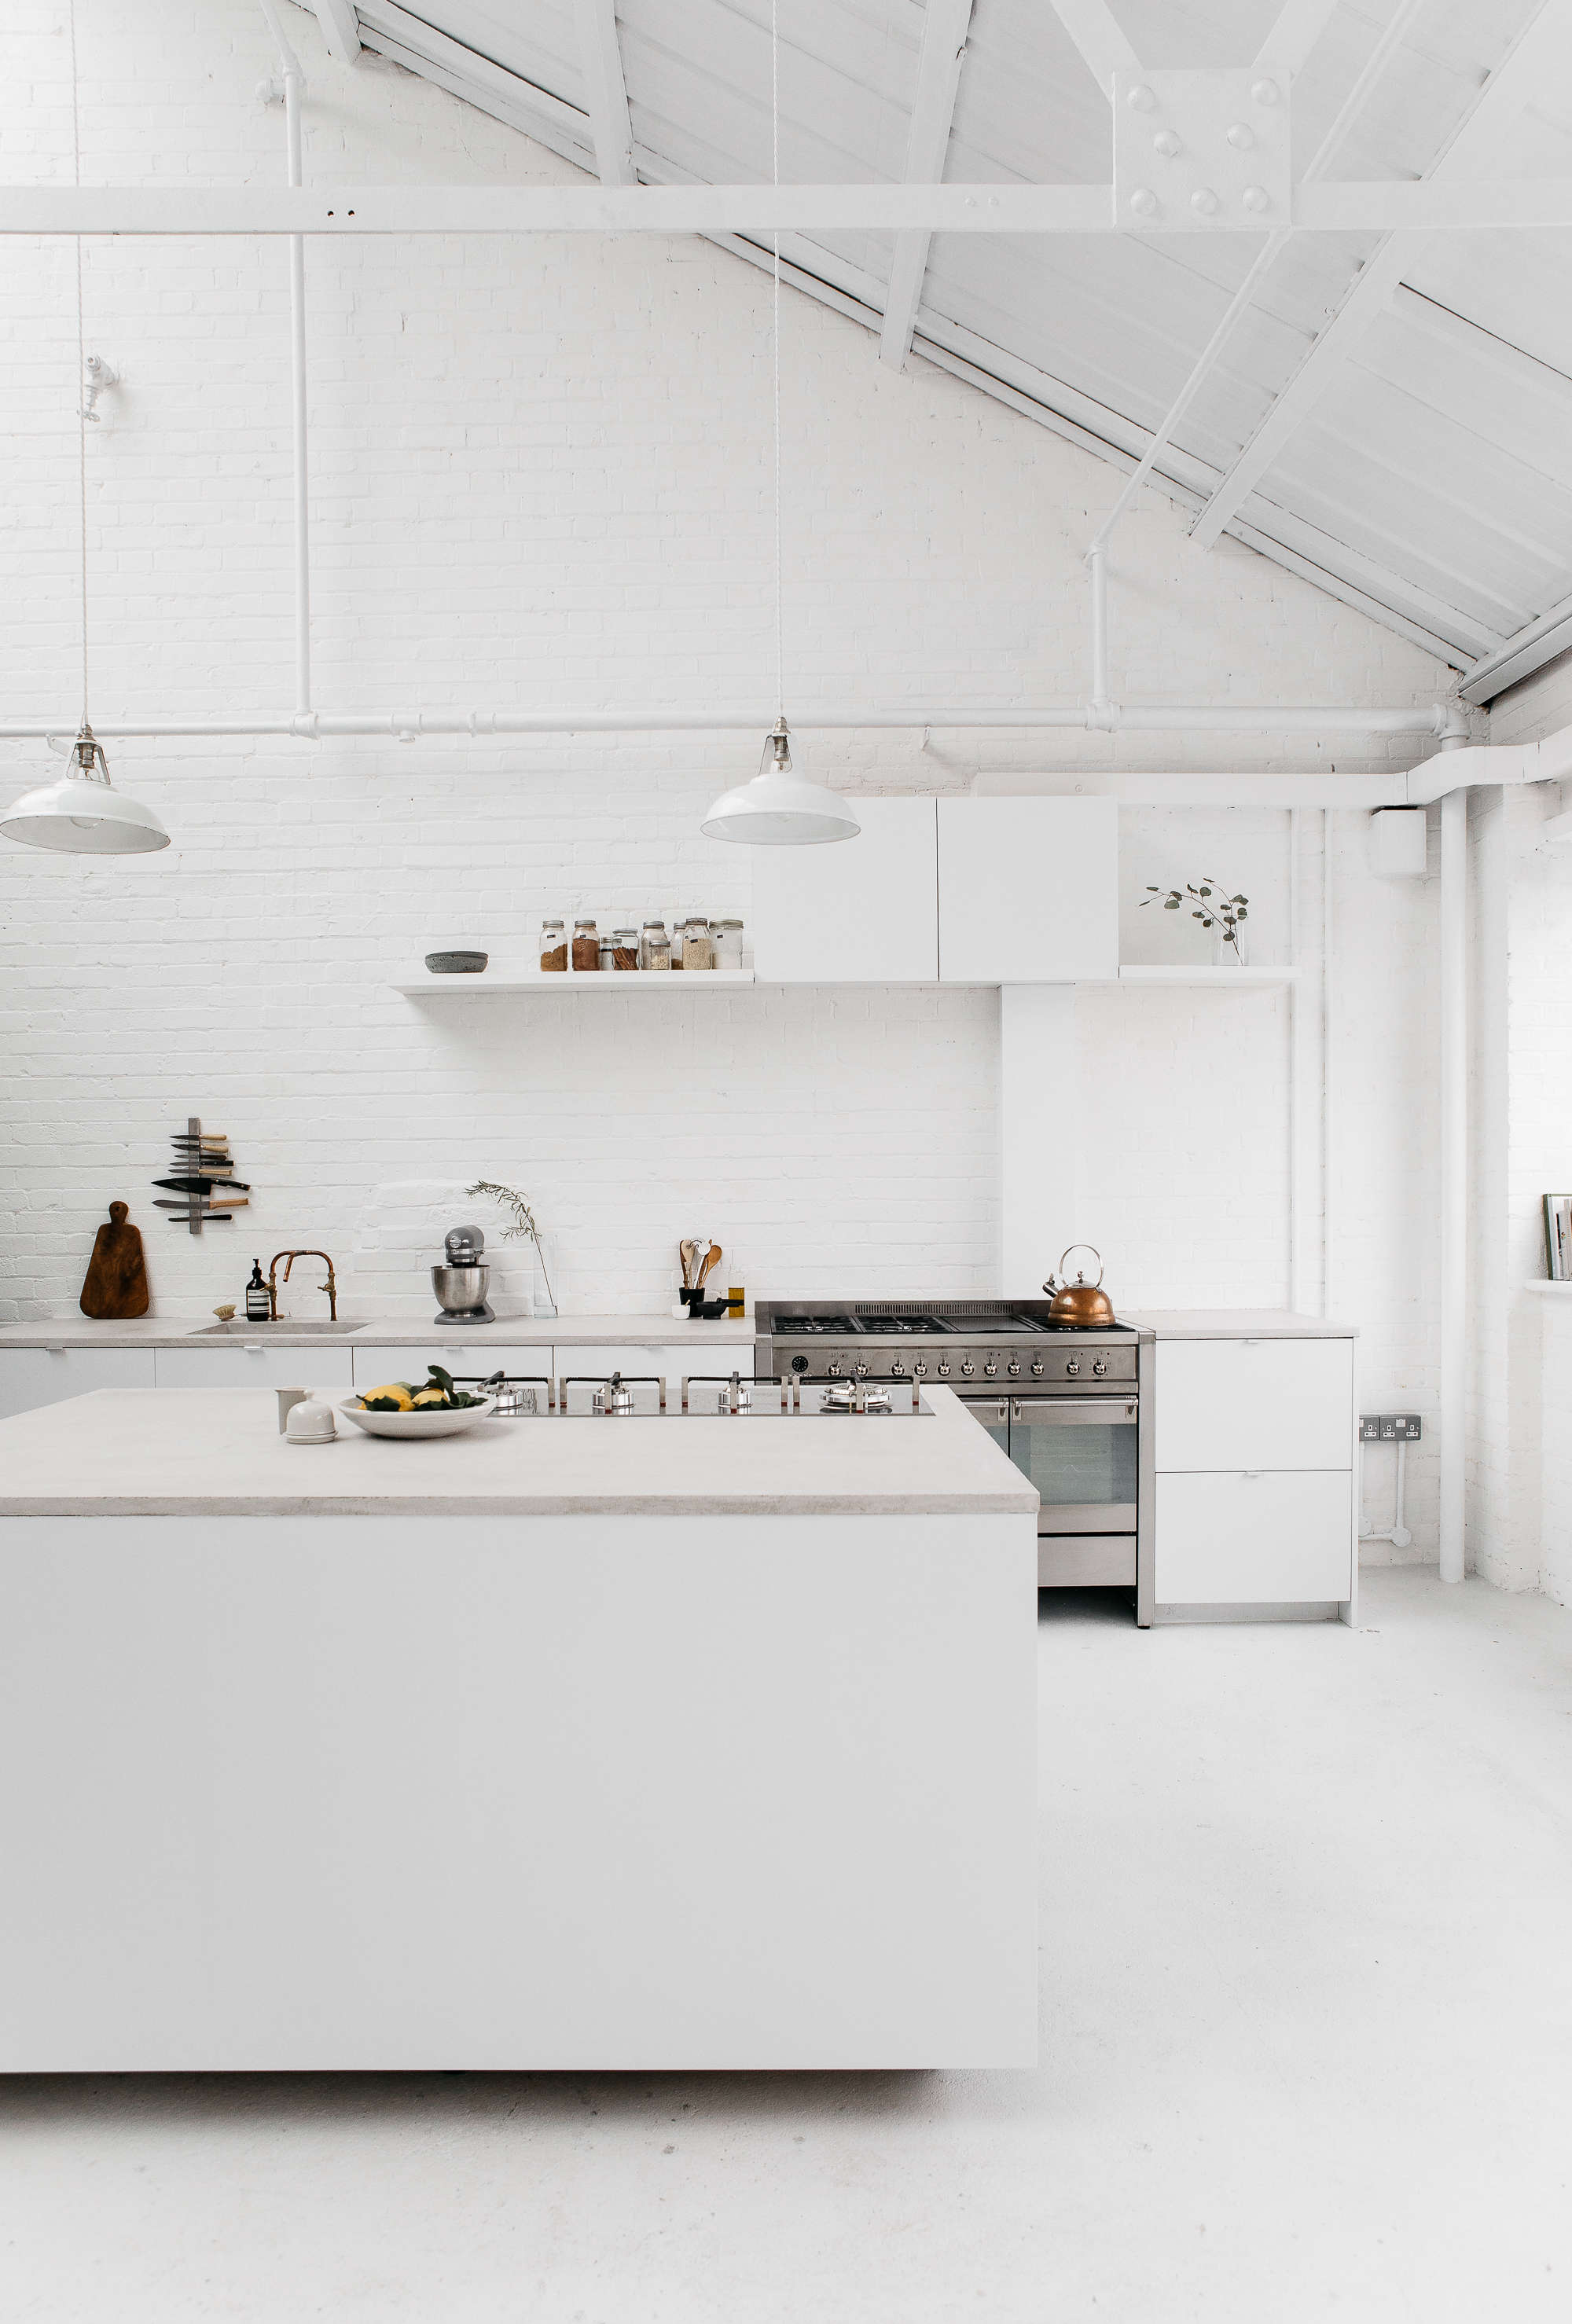 Kitchen of the Week: An Artful Ikea Hack Kitchen by Two London Foodies